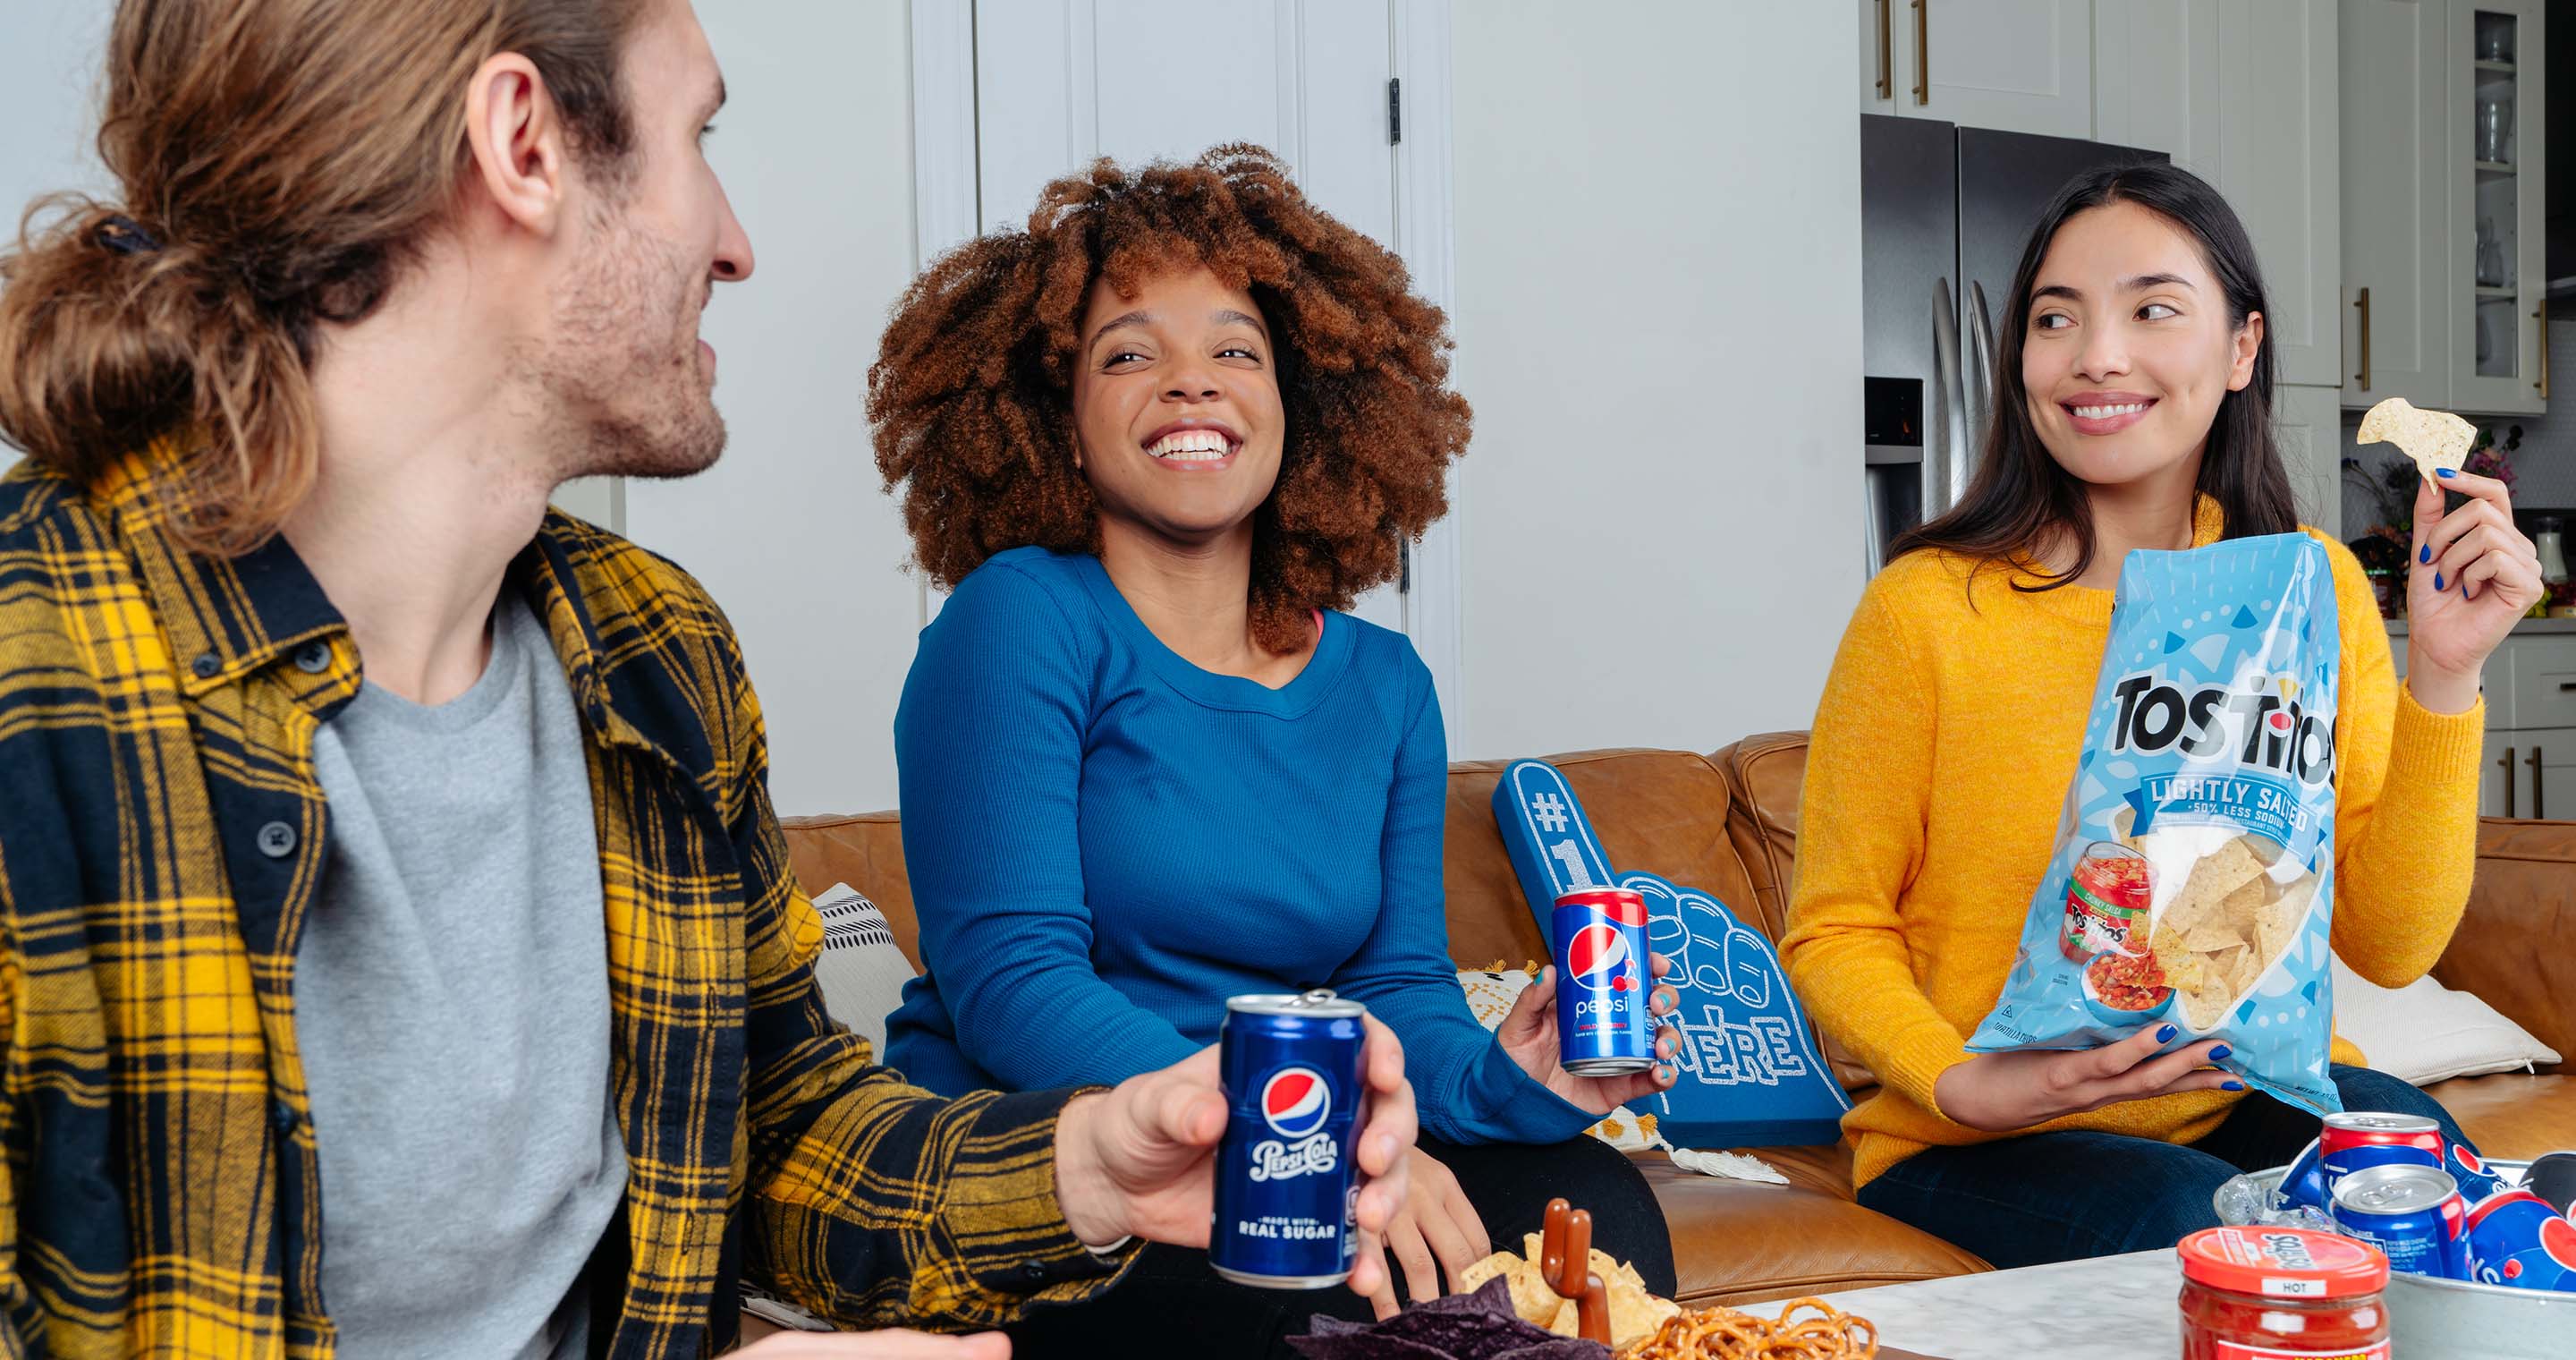 Friends celebrating a win for the home team with Tostitos and Pepsi